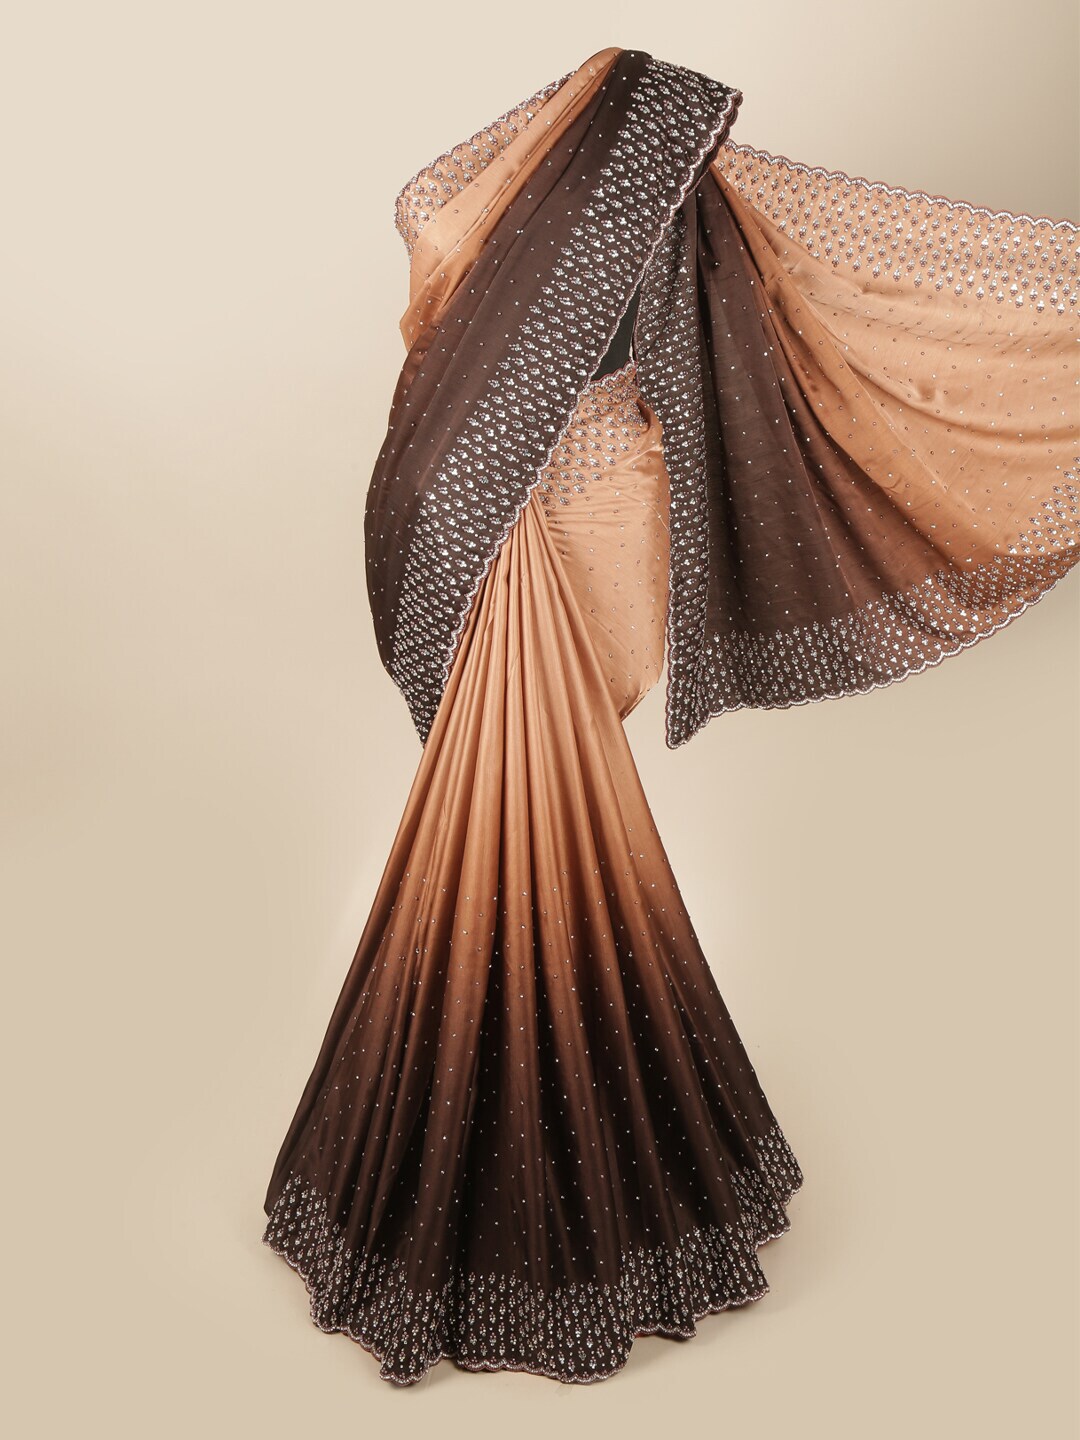 Pothys Brown & Cream-Coloured Embellished Beads and Stones Satin Saree Price in India